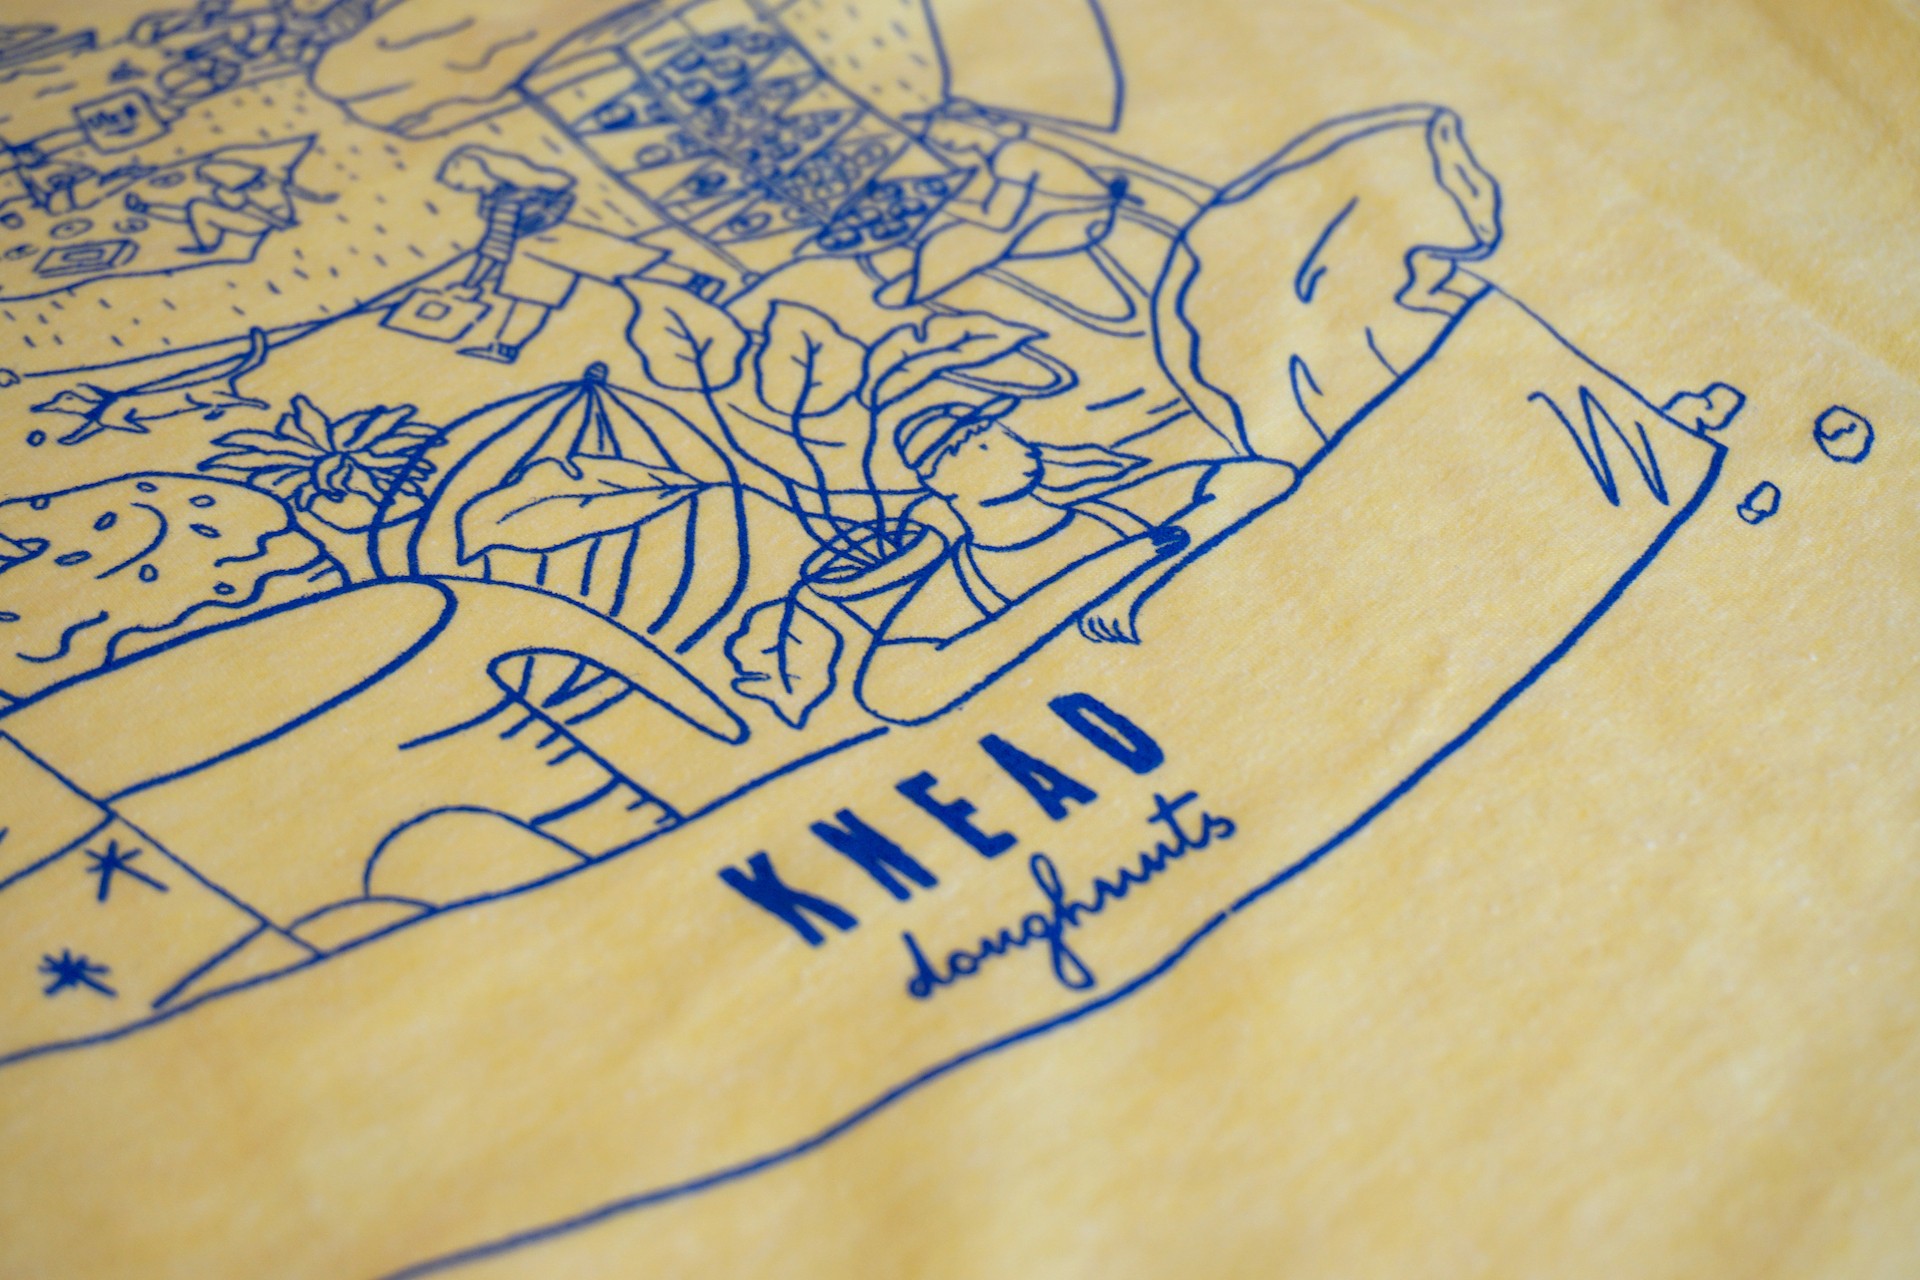 Detail of full back design of yellow t shirt. Text reads "Knead Doughnuts" Illustration shows oversized baking items, Knead employees and plants all inside Knead box of doughnuts. 